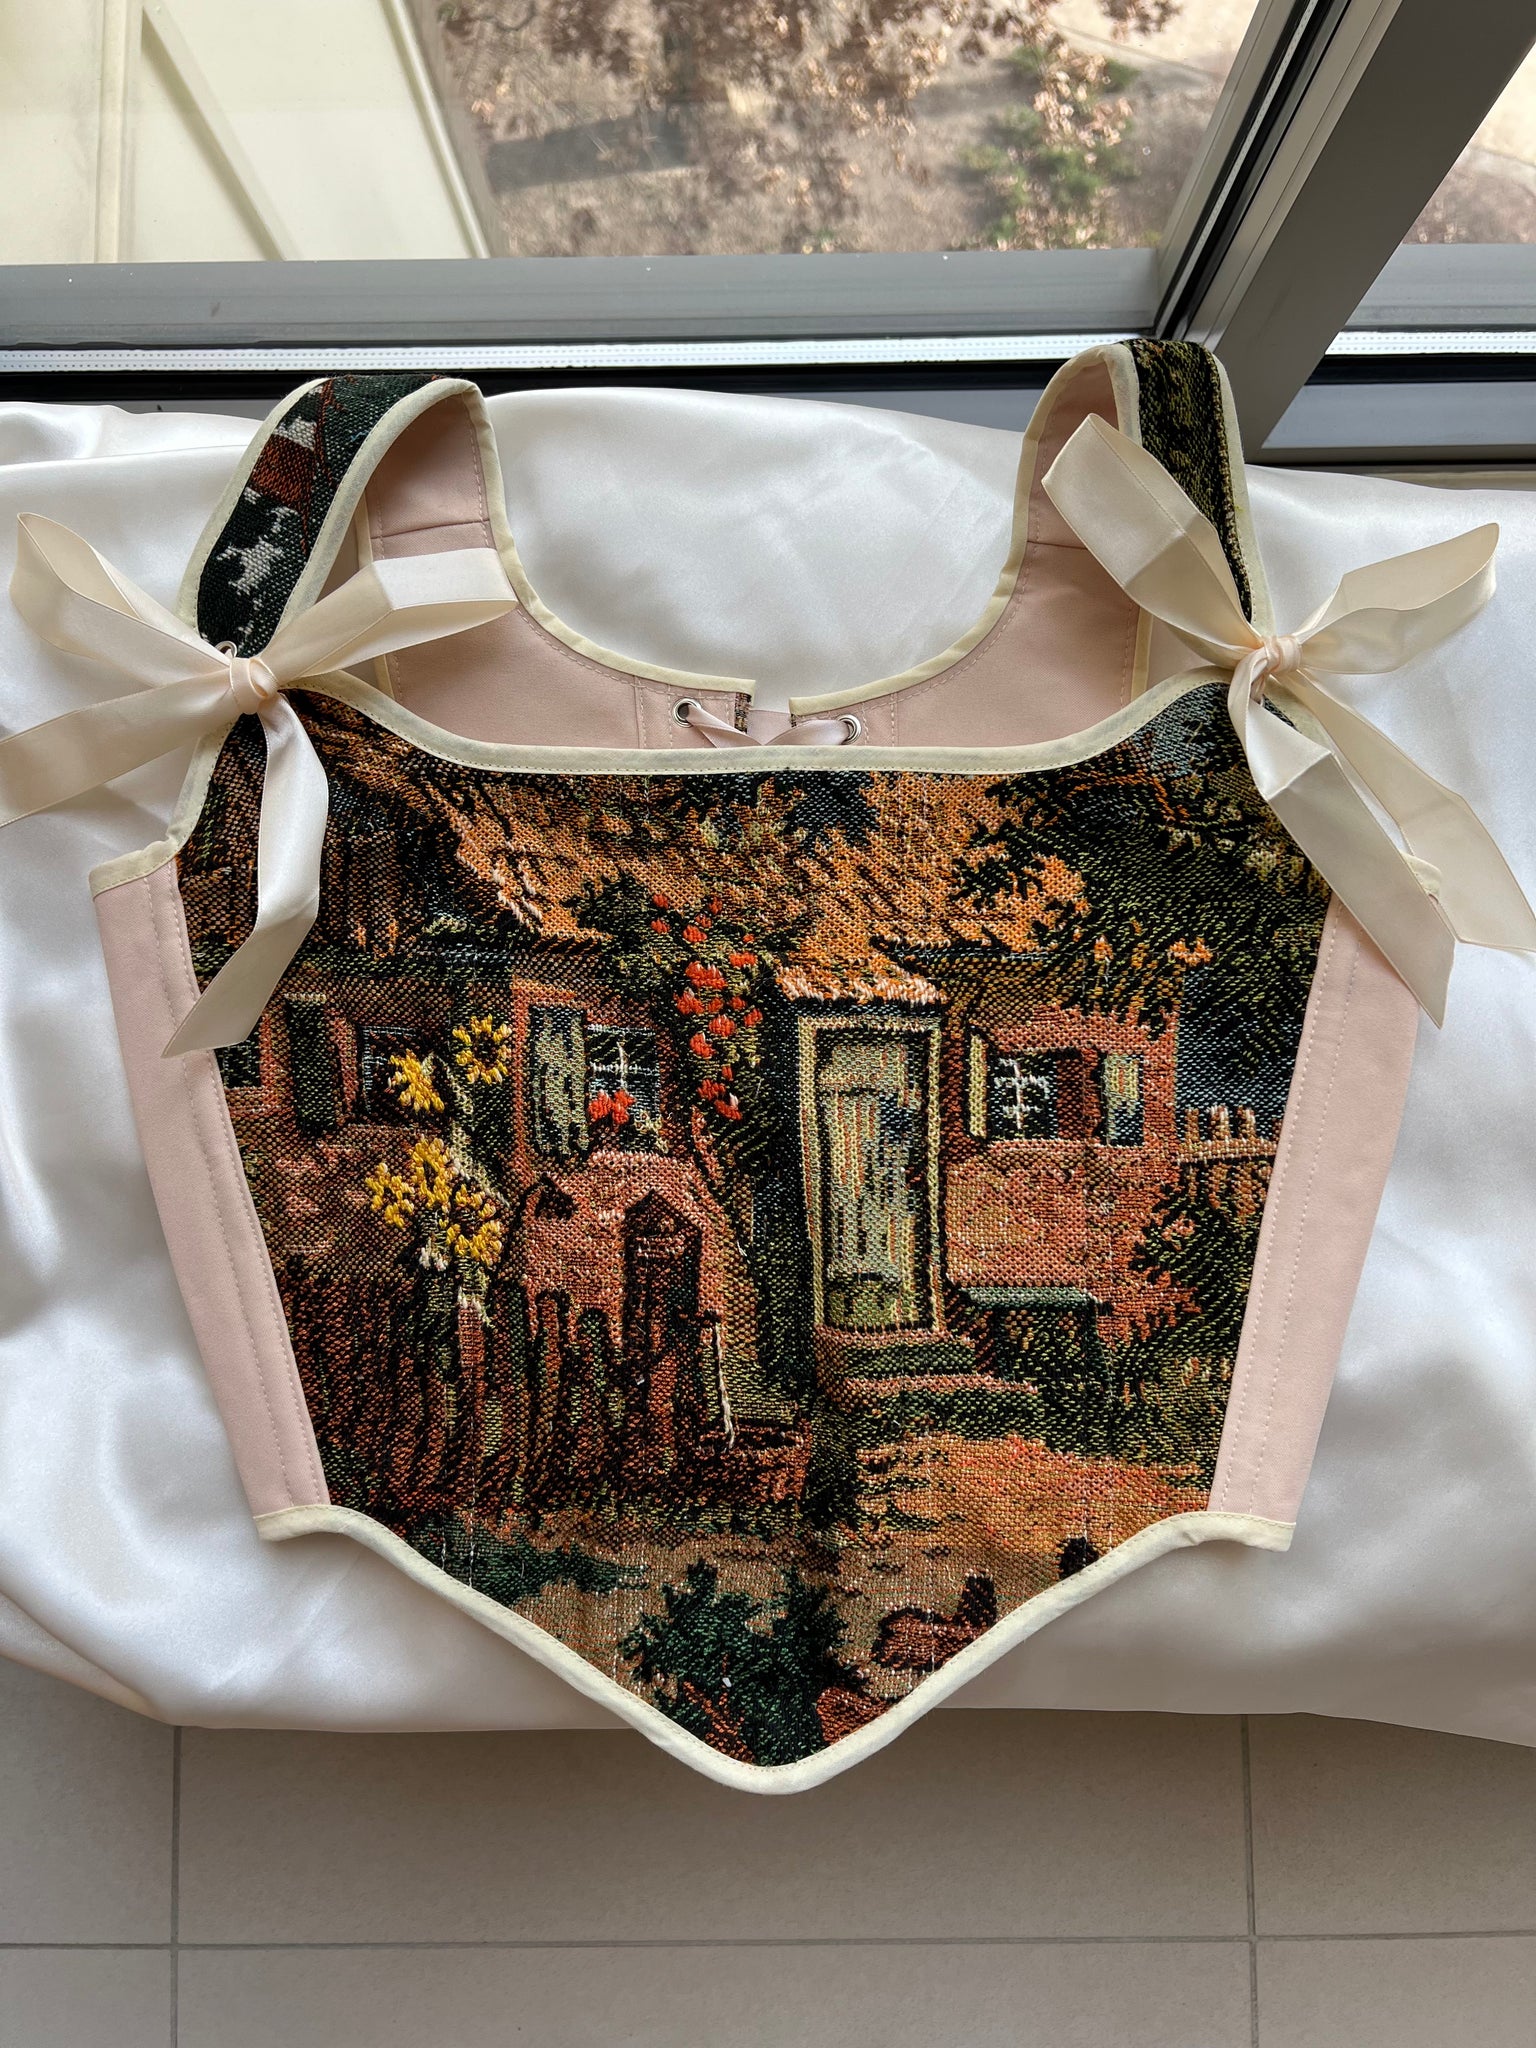 Lace-up Vintage Tapestry Corset Top, "Garden Cottage” Pattern, Size S-M (US 4-8)